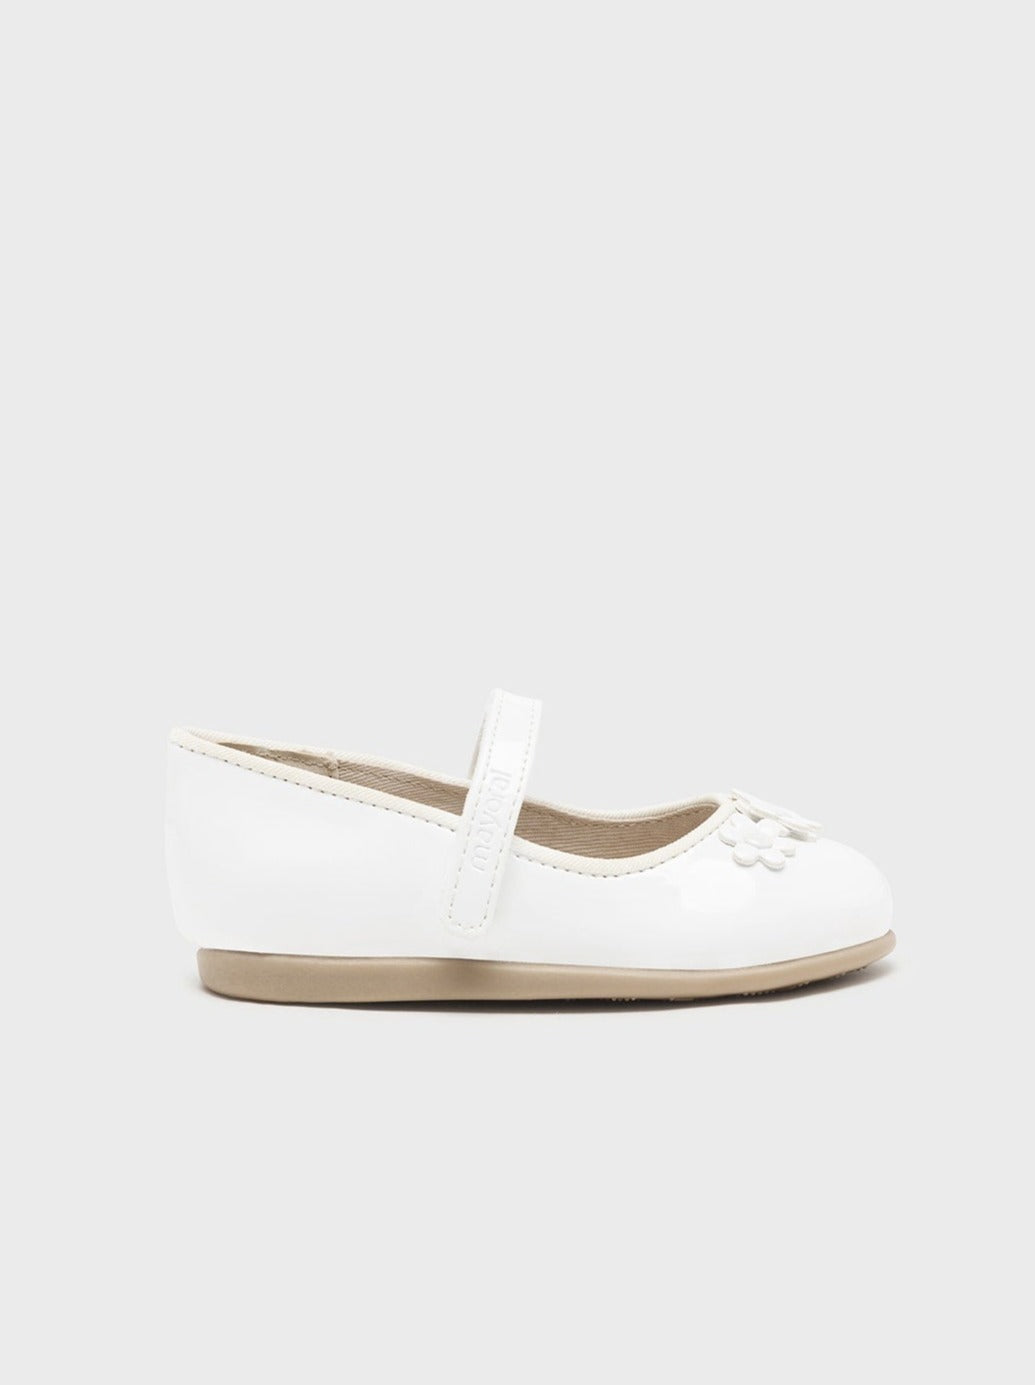 Mayoral Baby Leather Mary Janes White_41442-080